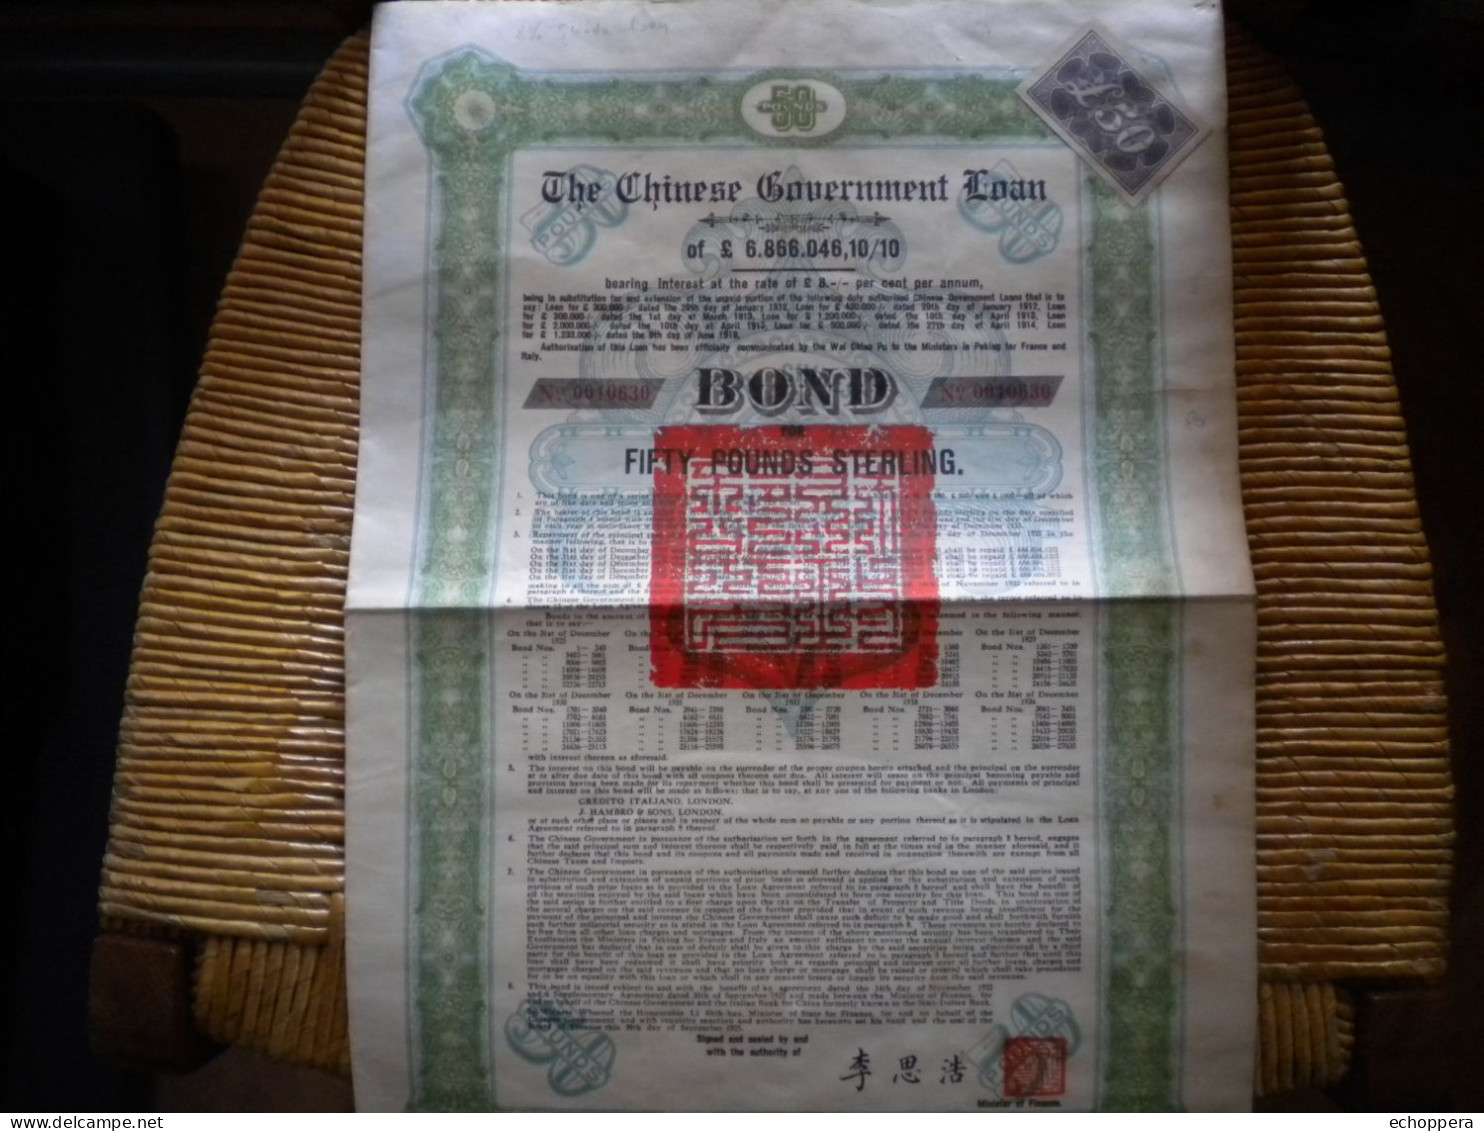 THE CHINESE GOVERNMENT LOAN - 50 £ Sterling  8%  CANTON KOWLOON RAILWAYS - 1925 - Asien